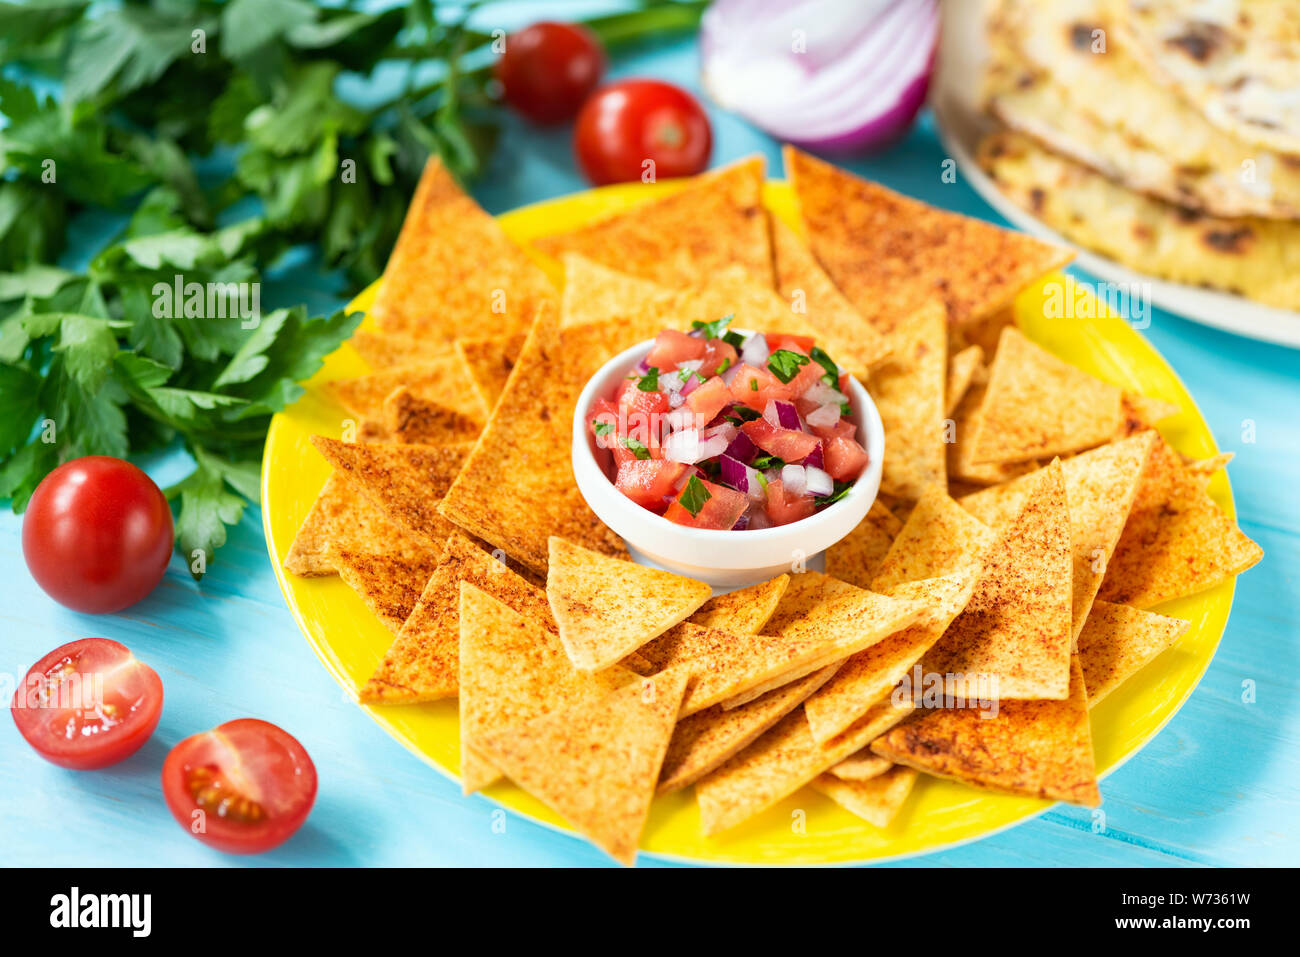 Corn Tortilla Chips Nachos With Paprika And Tomato Salsa On Plate, Blue Background. Traditional Mexican Food Tex Mex Stock Photo